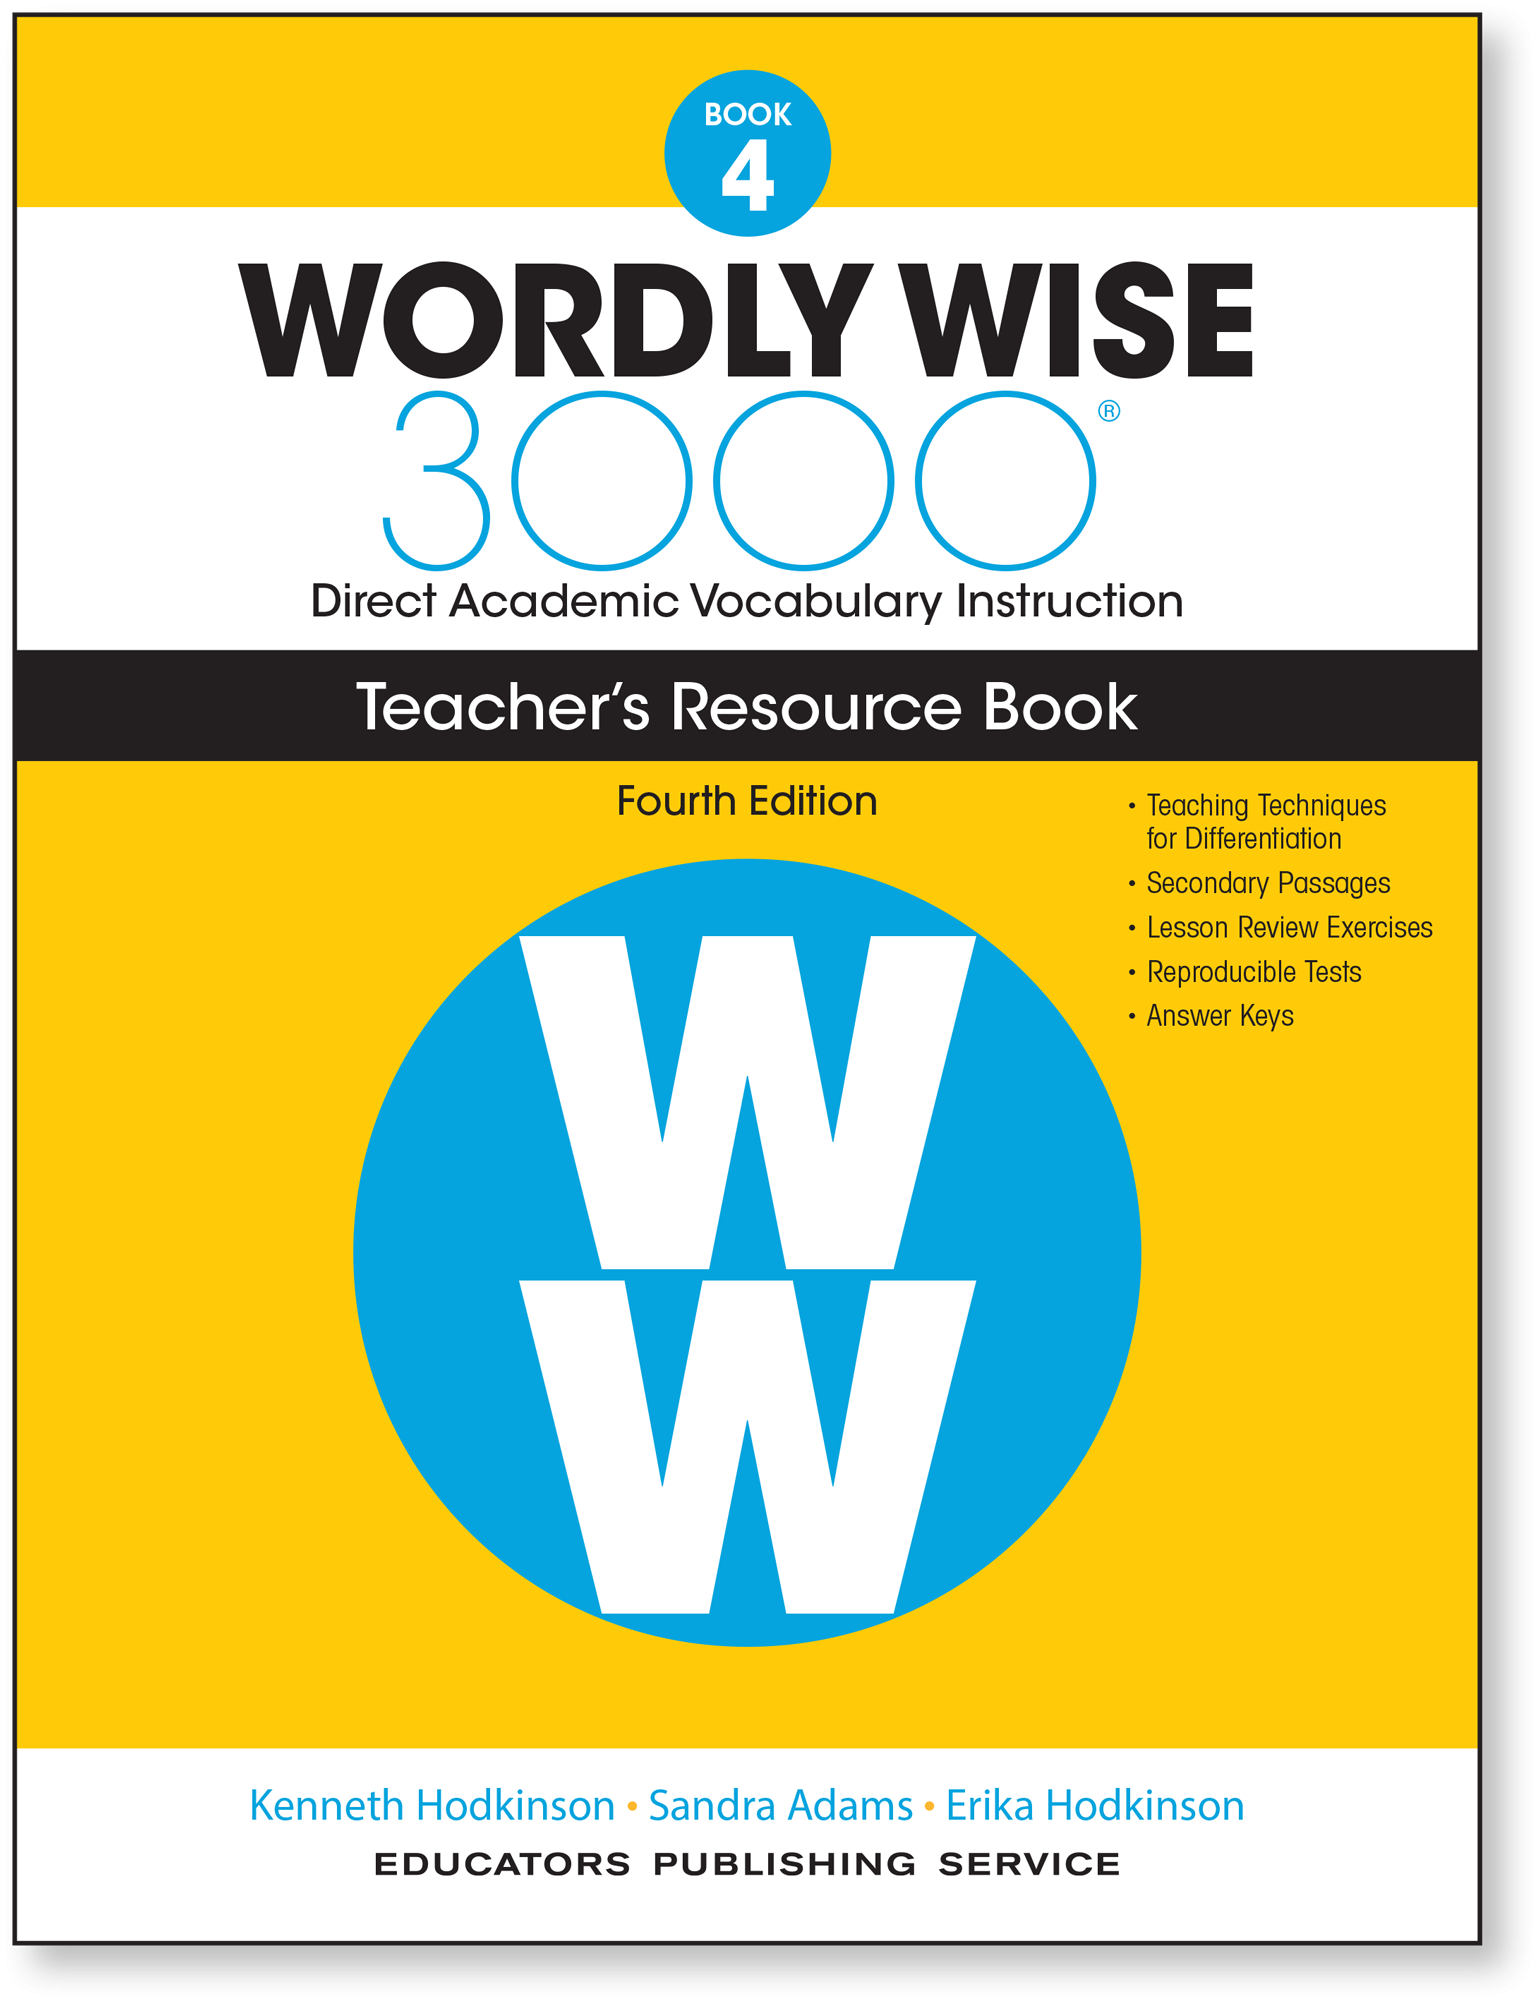 Wordly Wise 3000 Teacher's Resource Book 4 (4th Edition)